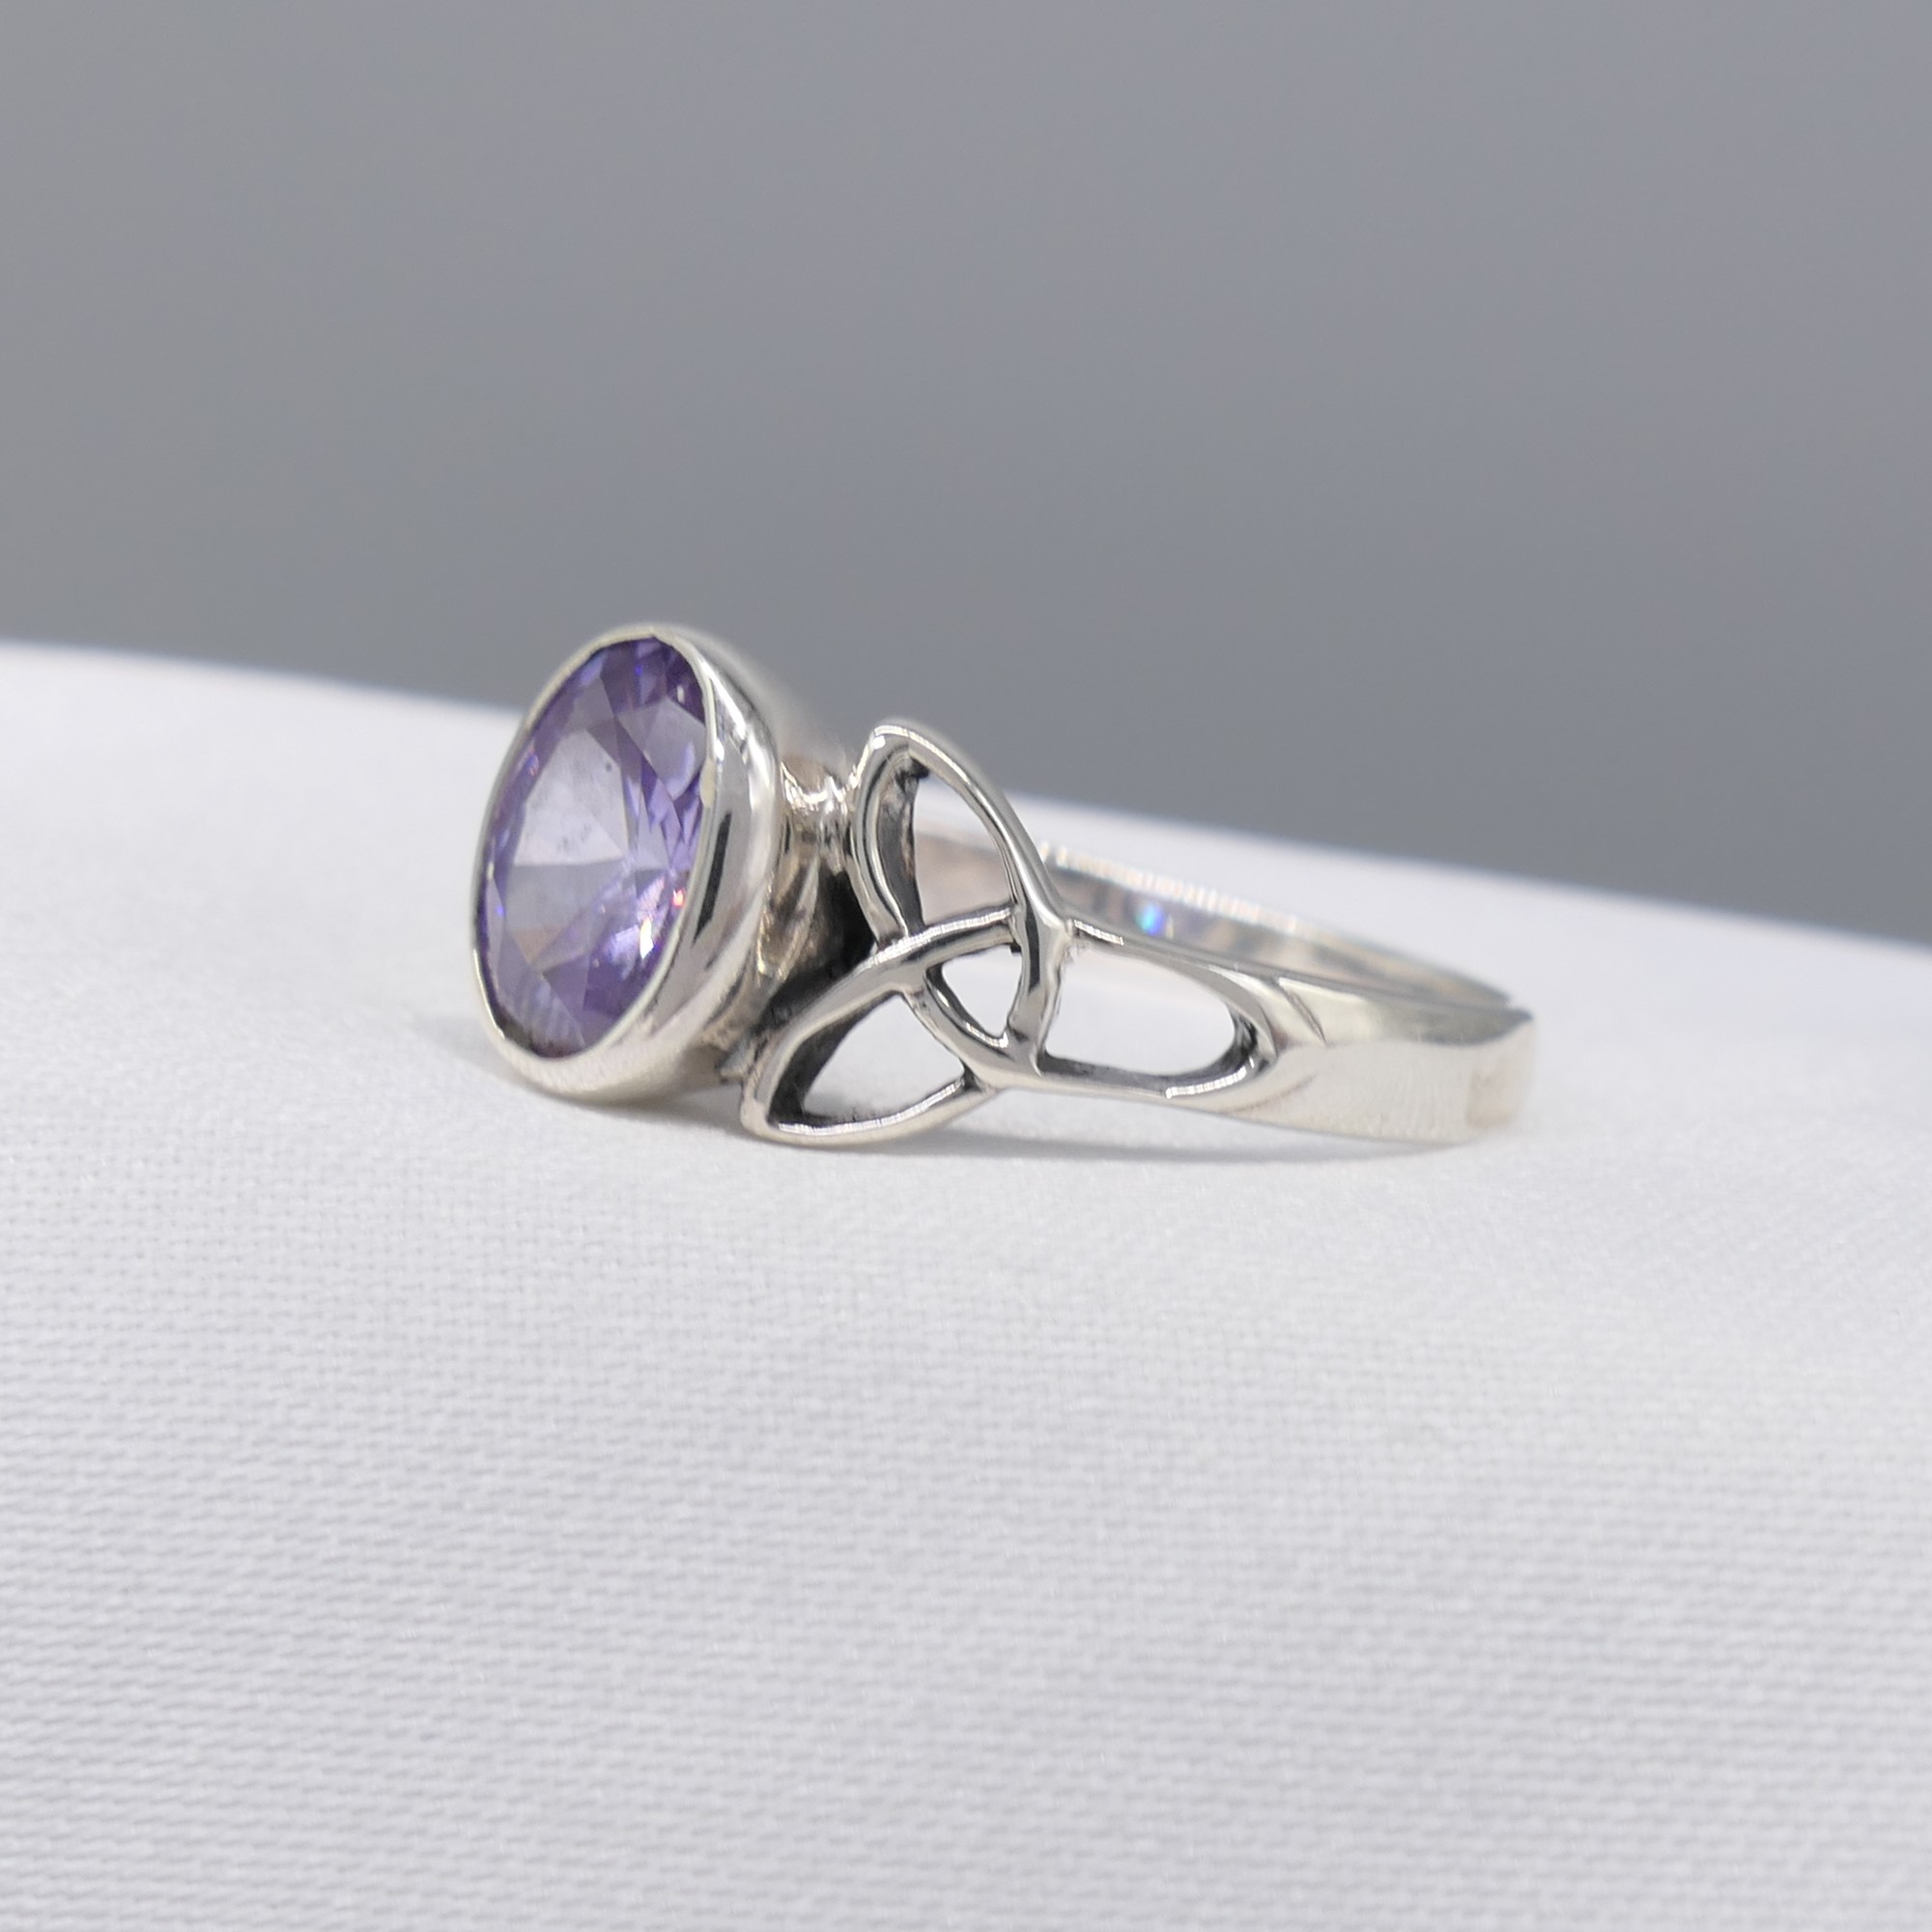 Sterling silver Celtic-style dress ring set with an oval purple cubic zirconia - Image 3 of 6